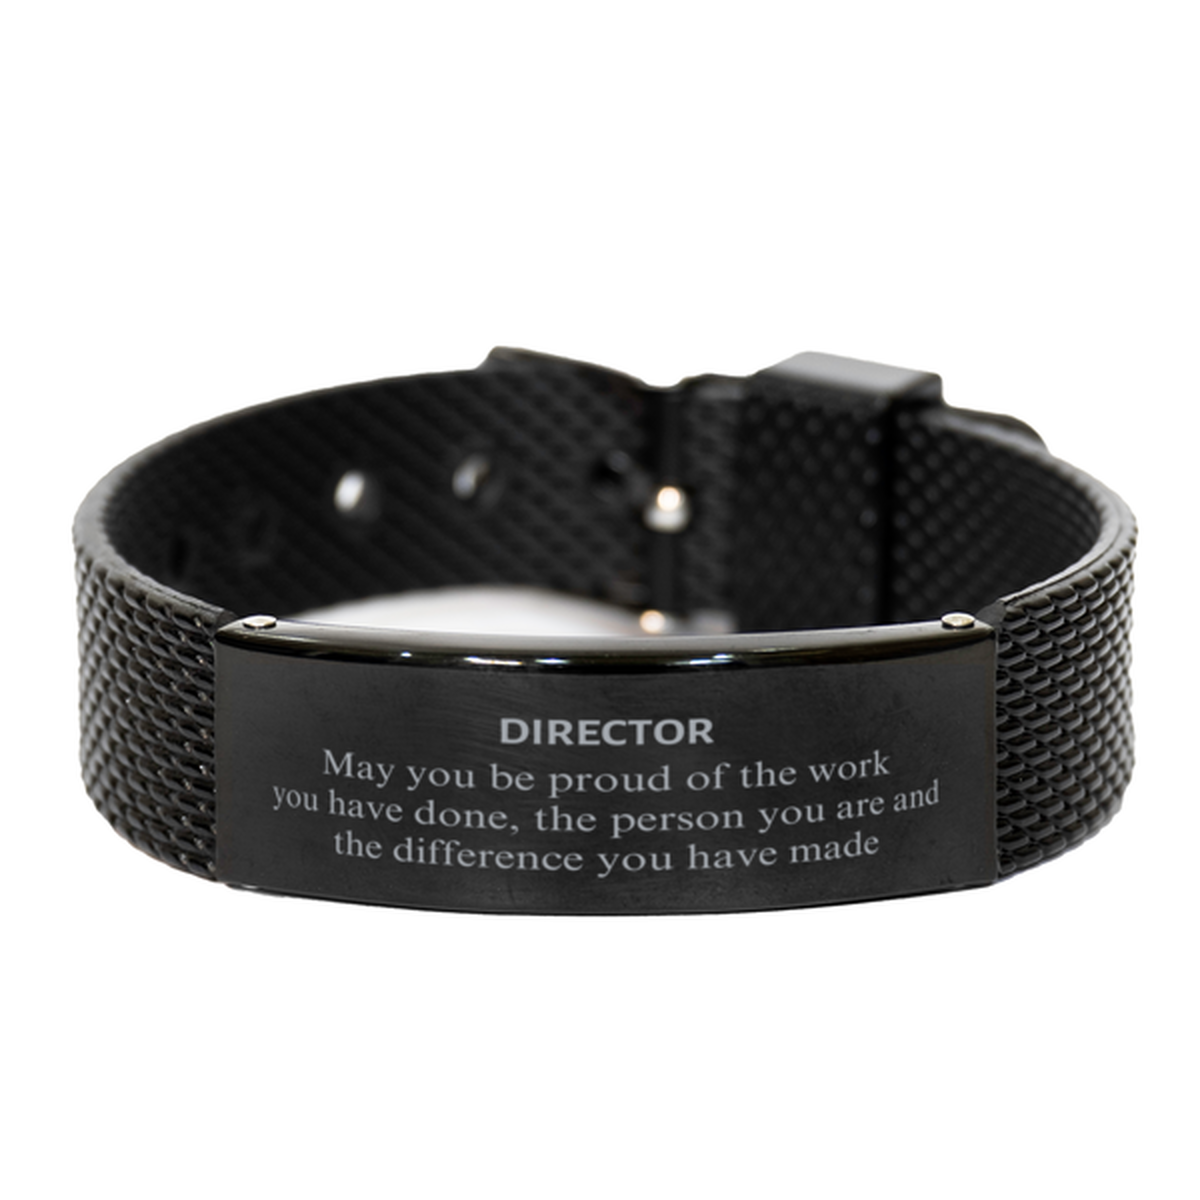 Director May you be proud of the work you have done, Retirement Director Black Shark Mesh Bracelet for Colleague Appreciation Gifts Amazing for Director